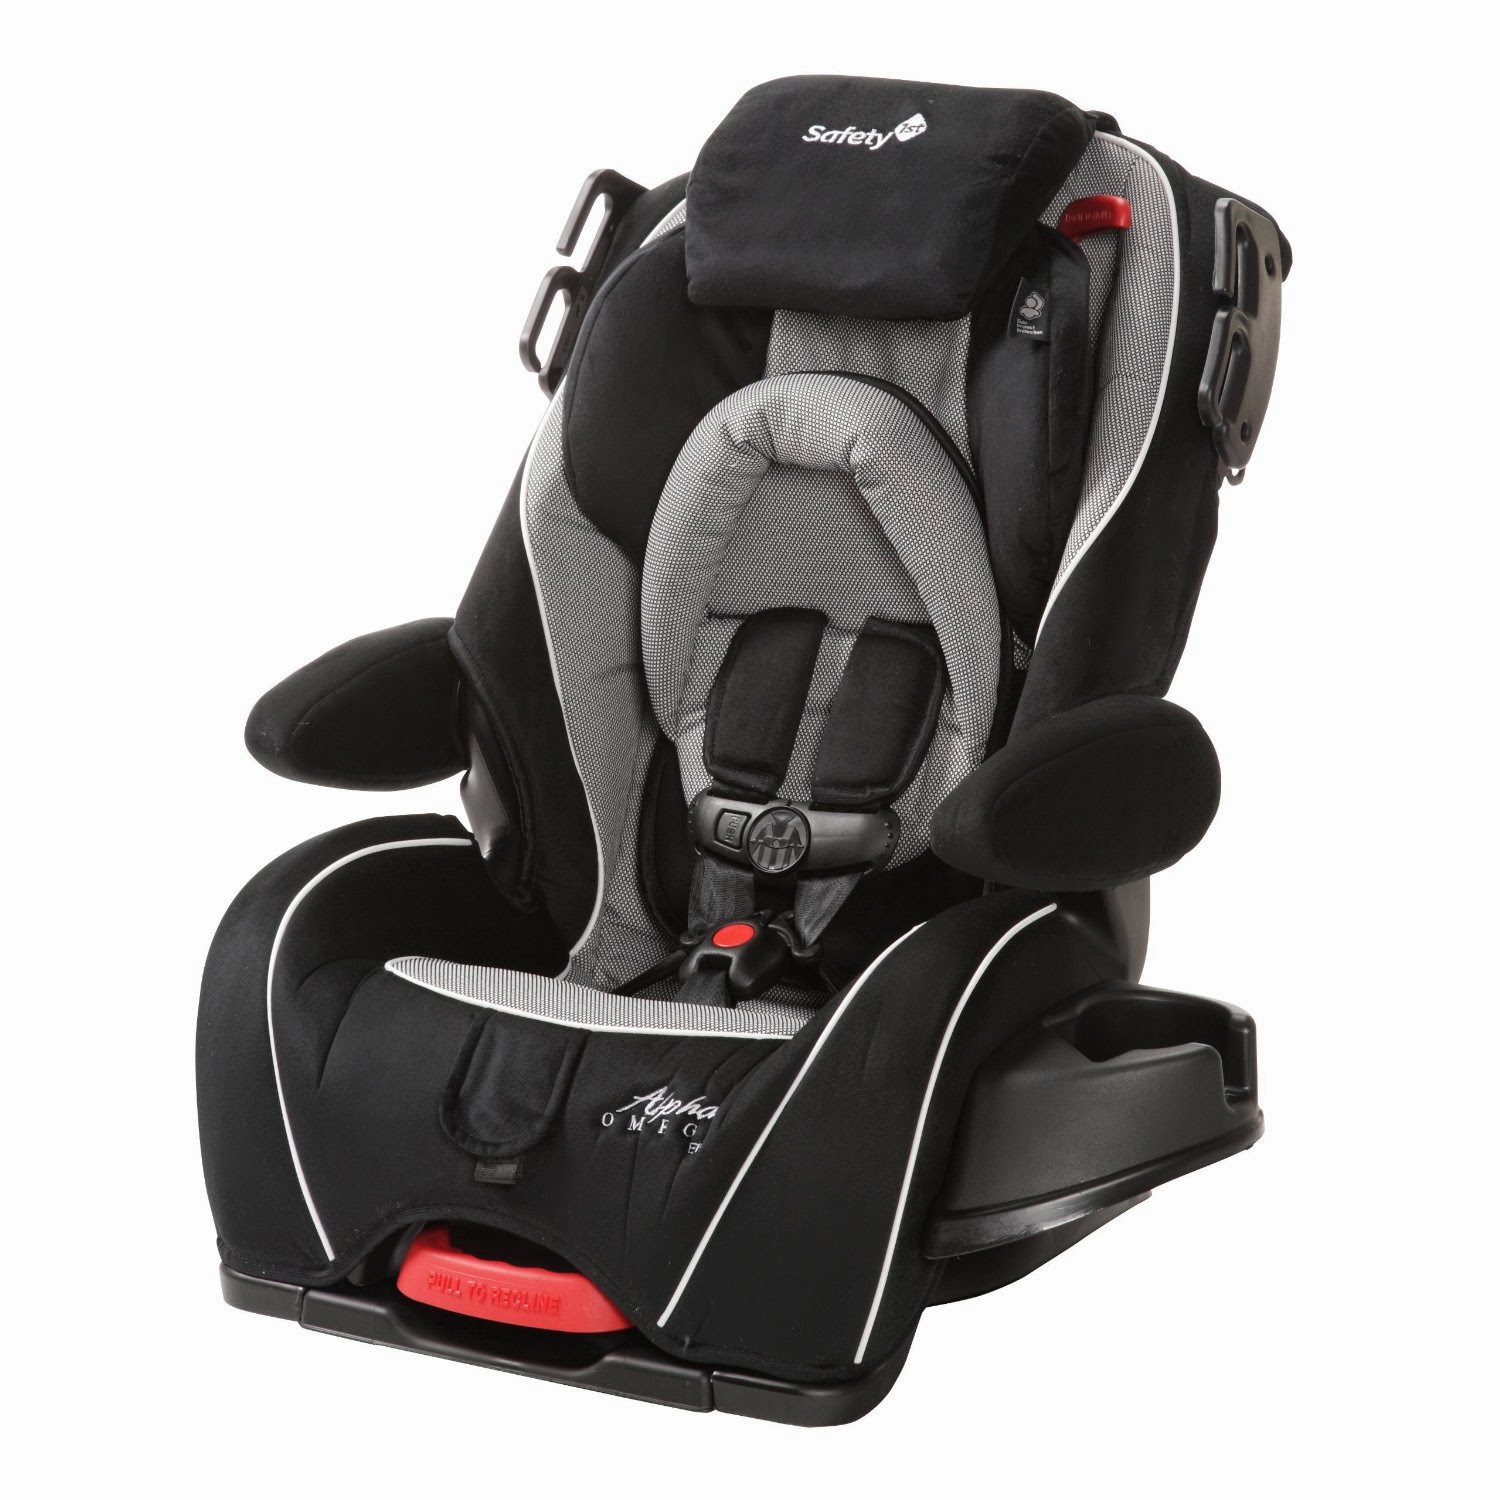 All Things Children: Safety 1st Alpha Elite 65 Convertible Car Seat